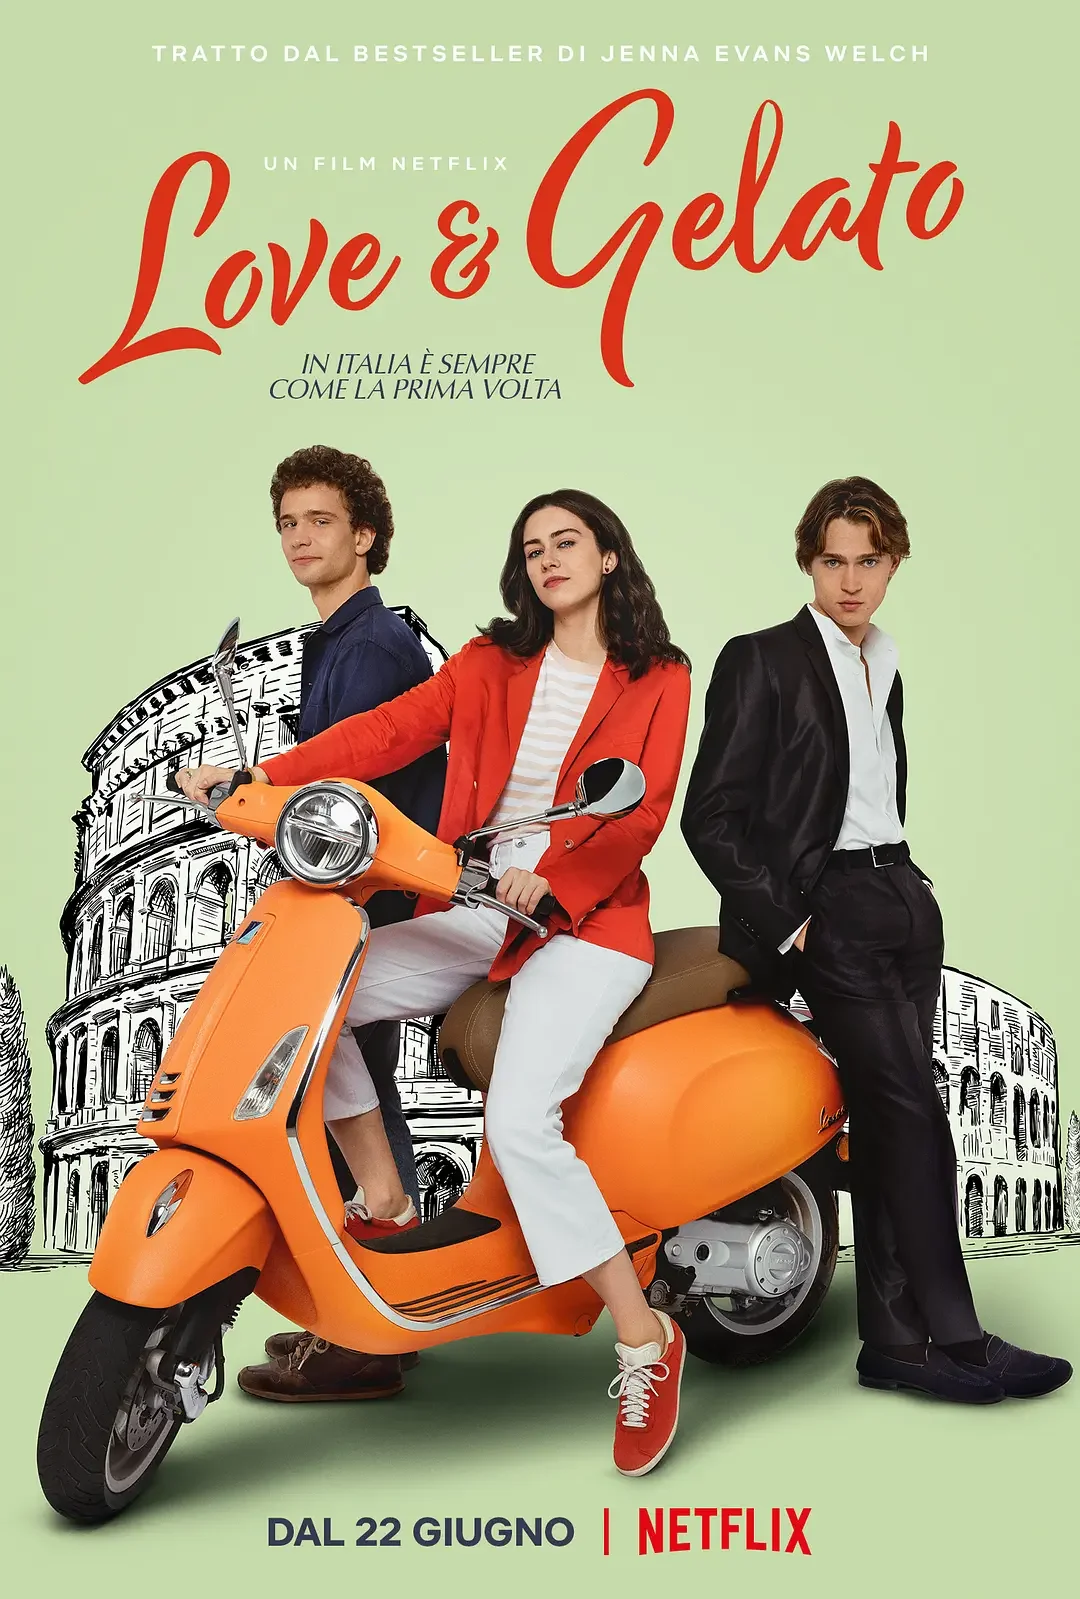 "Love & Gelato" release Official Trailer, it will be released in theaters on June 22nd